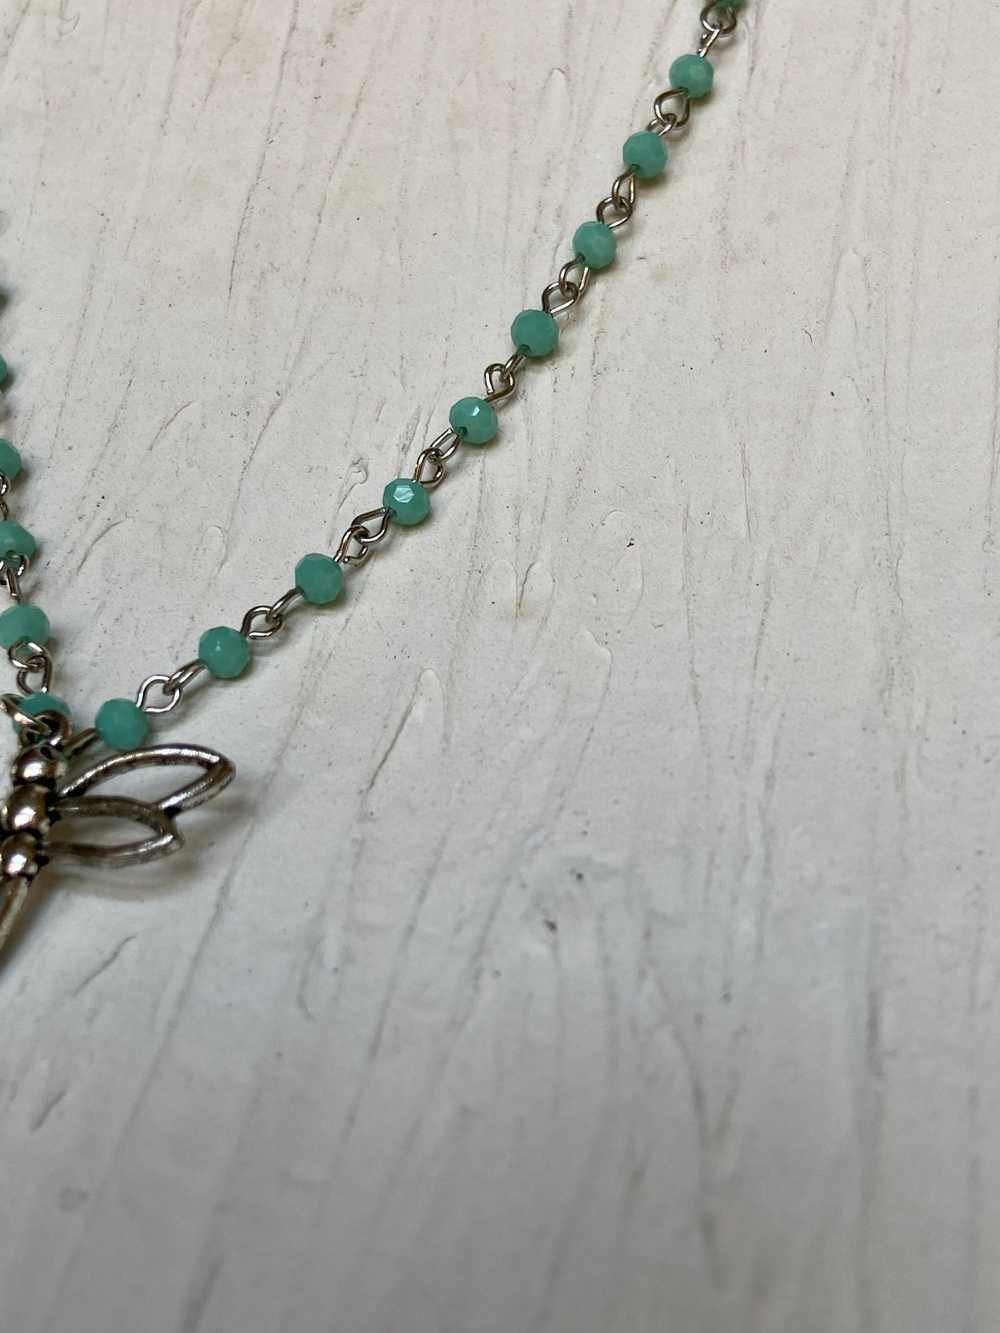 Dragonfly necklace - image 4